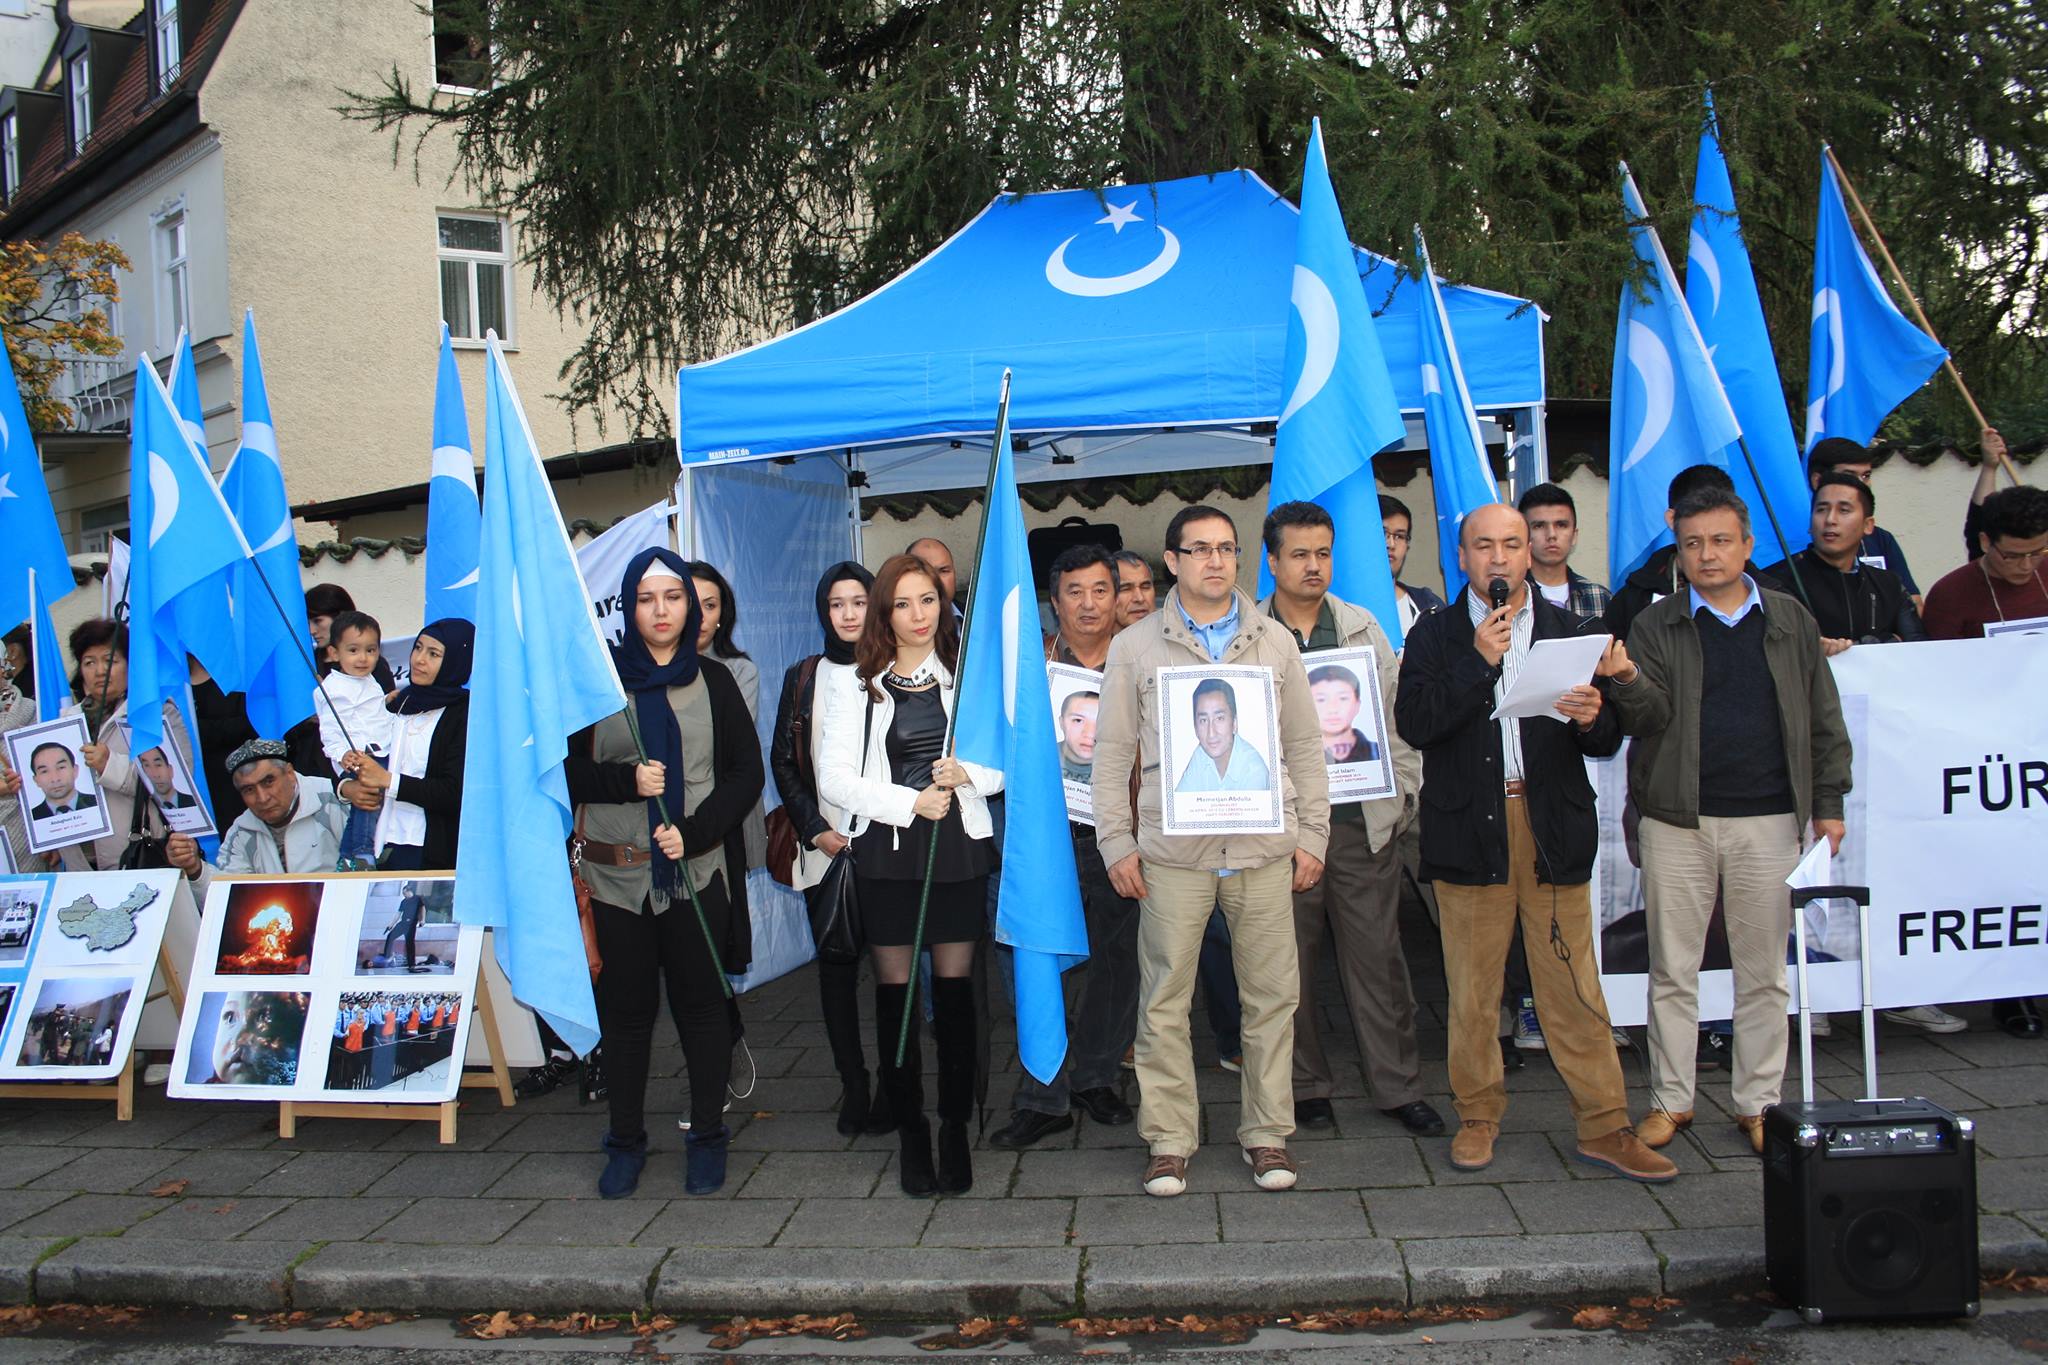 Uyghurs Stage International Demonstrations over Human Rights Abuses